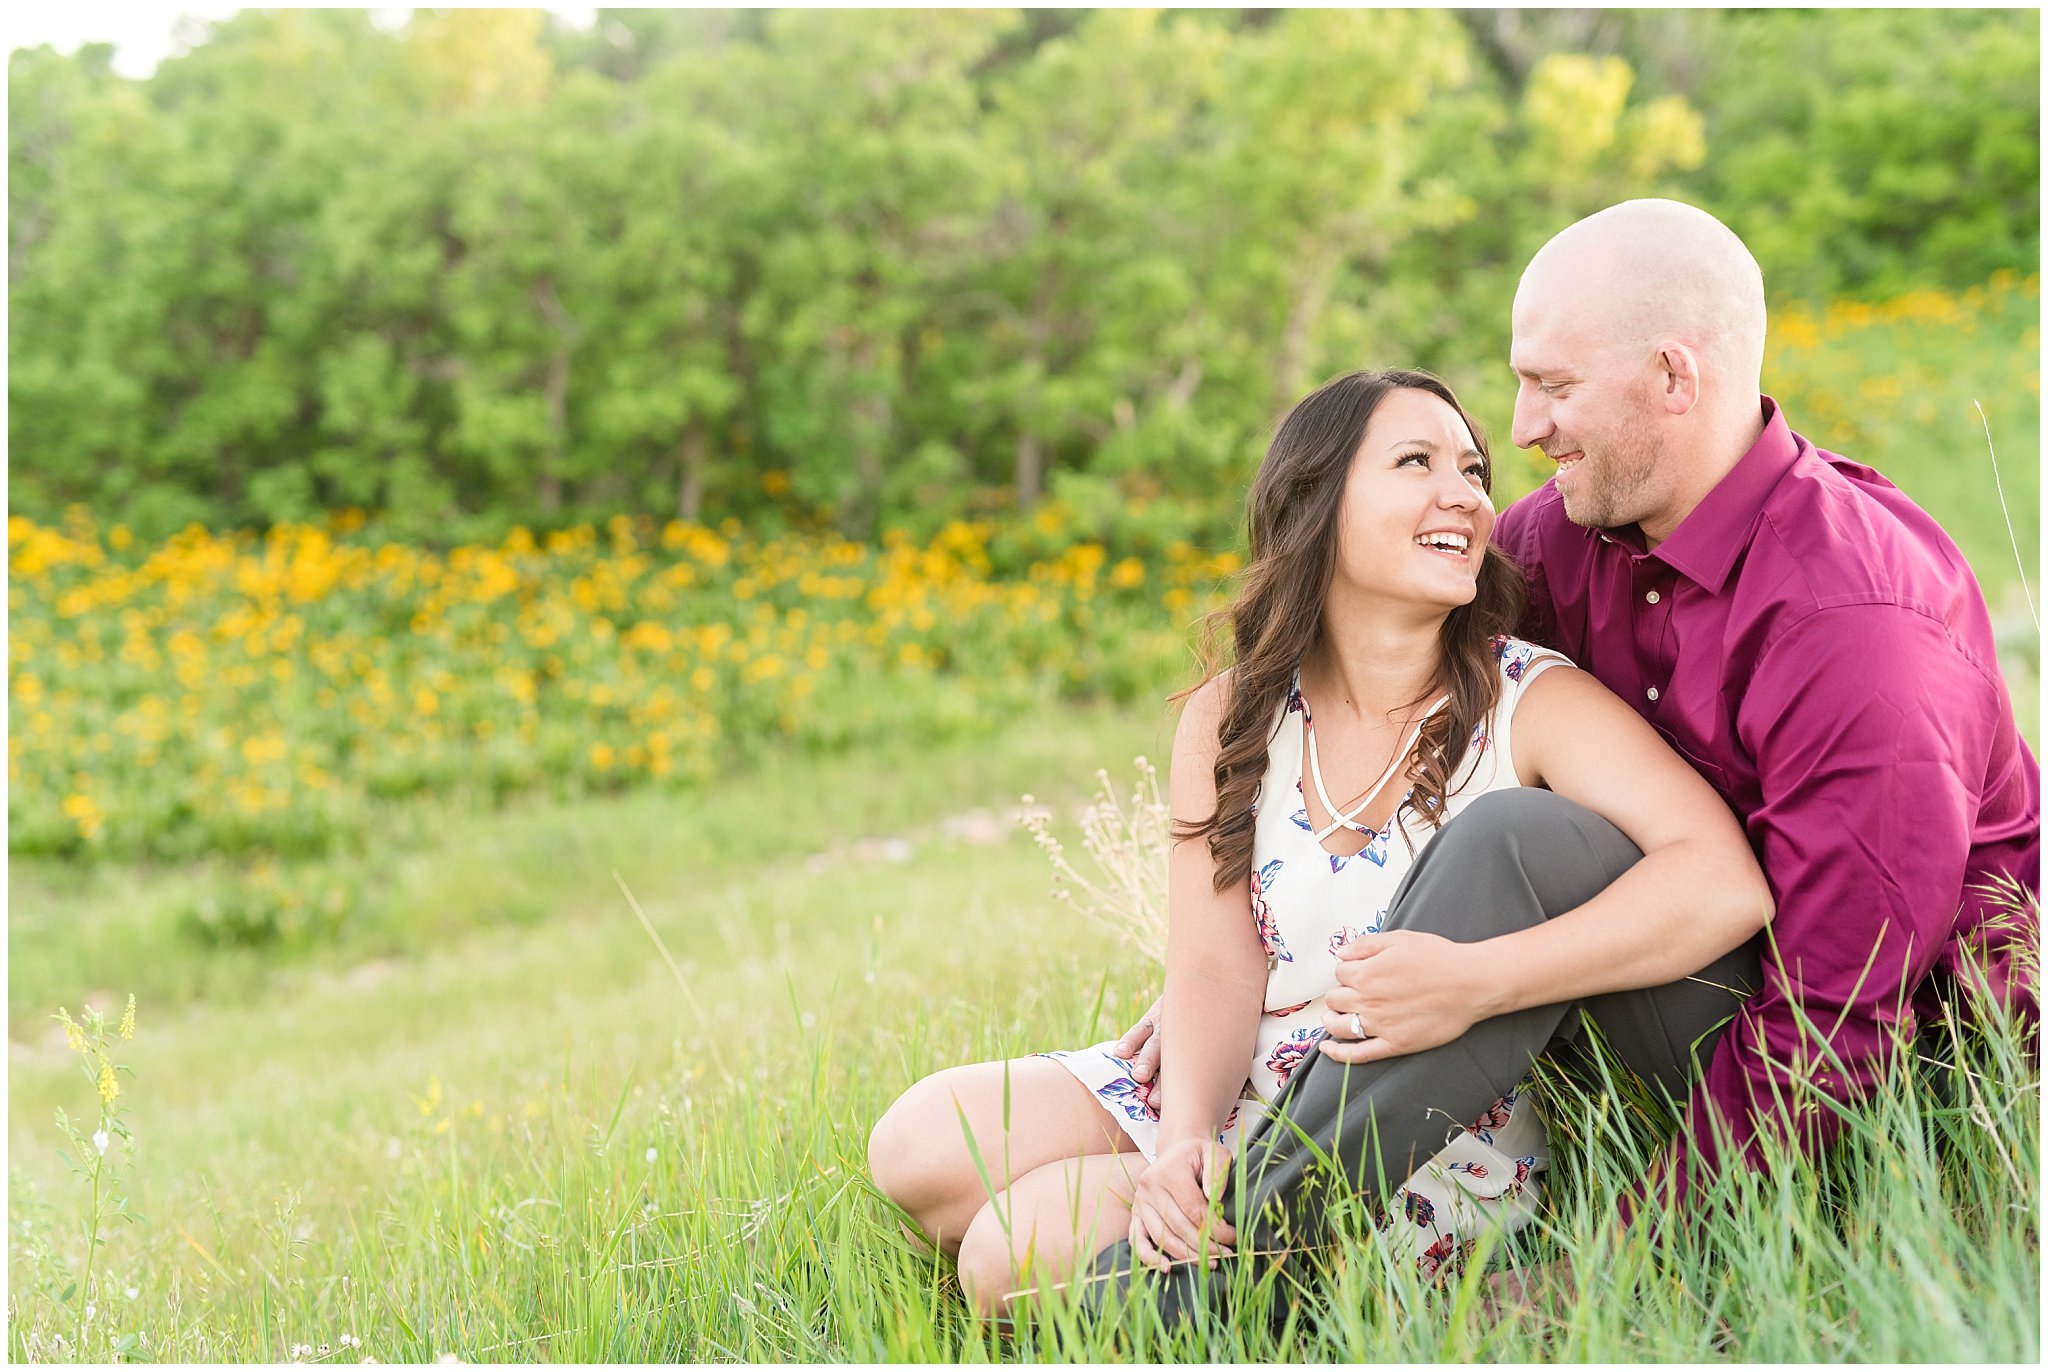 Snowbasin Resort Engagement Photography | Couple laughing on the mountain | Jessie and Dallin Photography